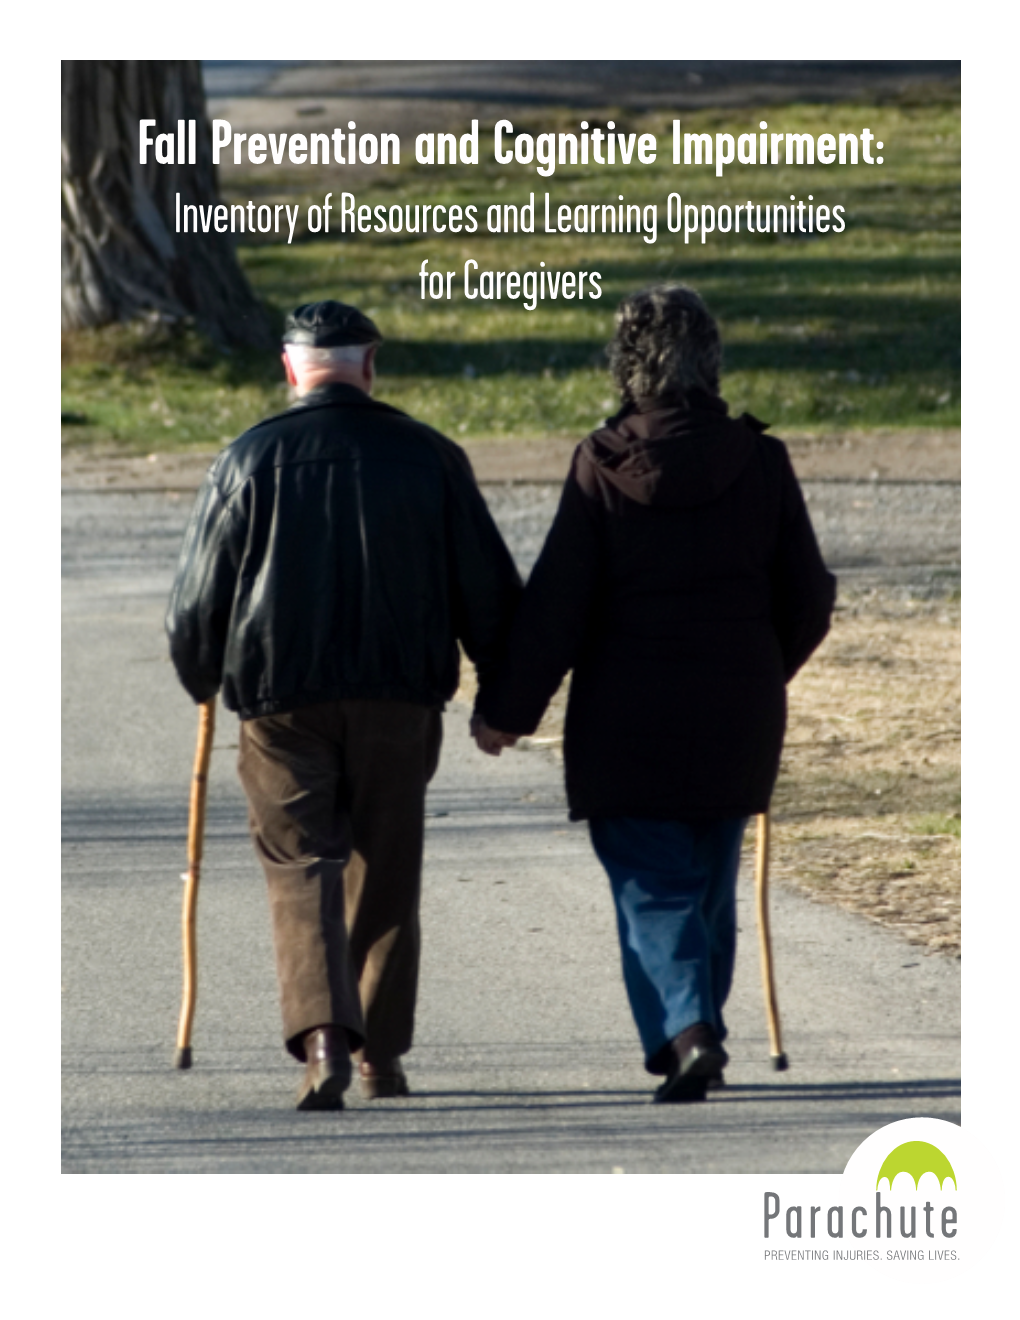 Fall Prevention and Cognitive Impairment: Inventory of Resources and Learning Opportunities for Caregivers